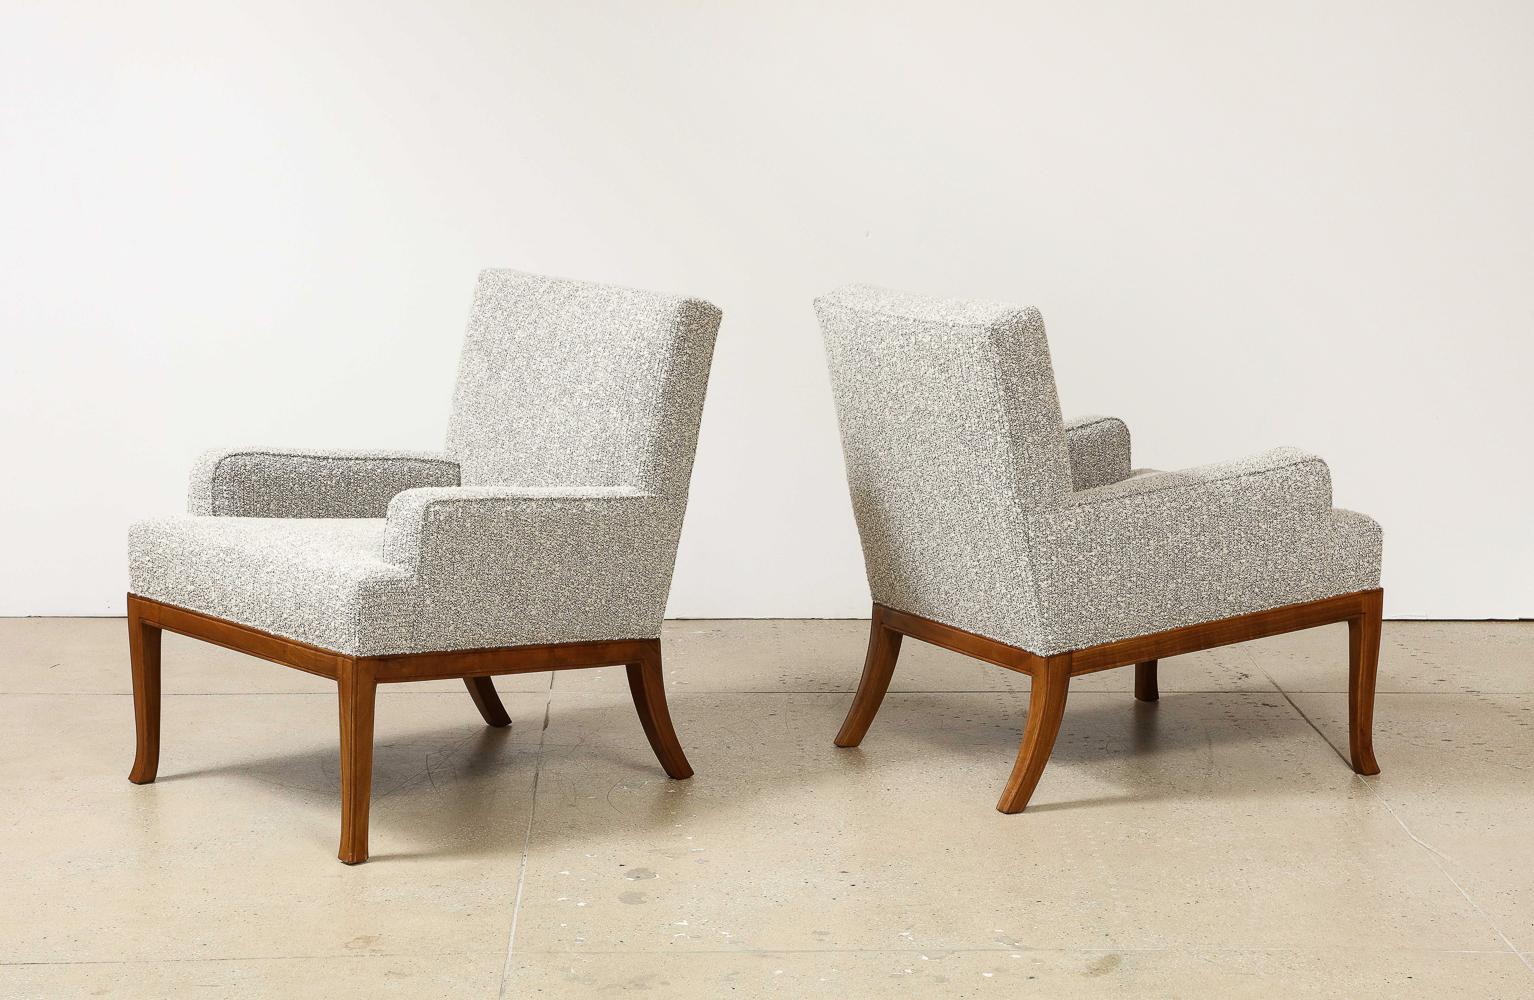 No. 102 Lounge Chairs by T. H. Robsjohn-Gibbings for Saridis.  Walnut with upholstery. Produced by Saridis Furniture, Greece. Unmarked.